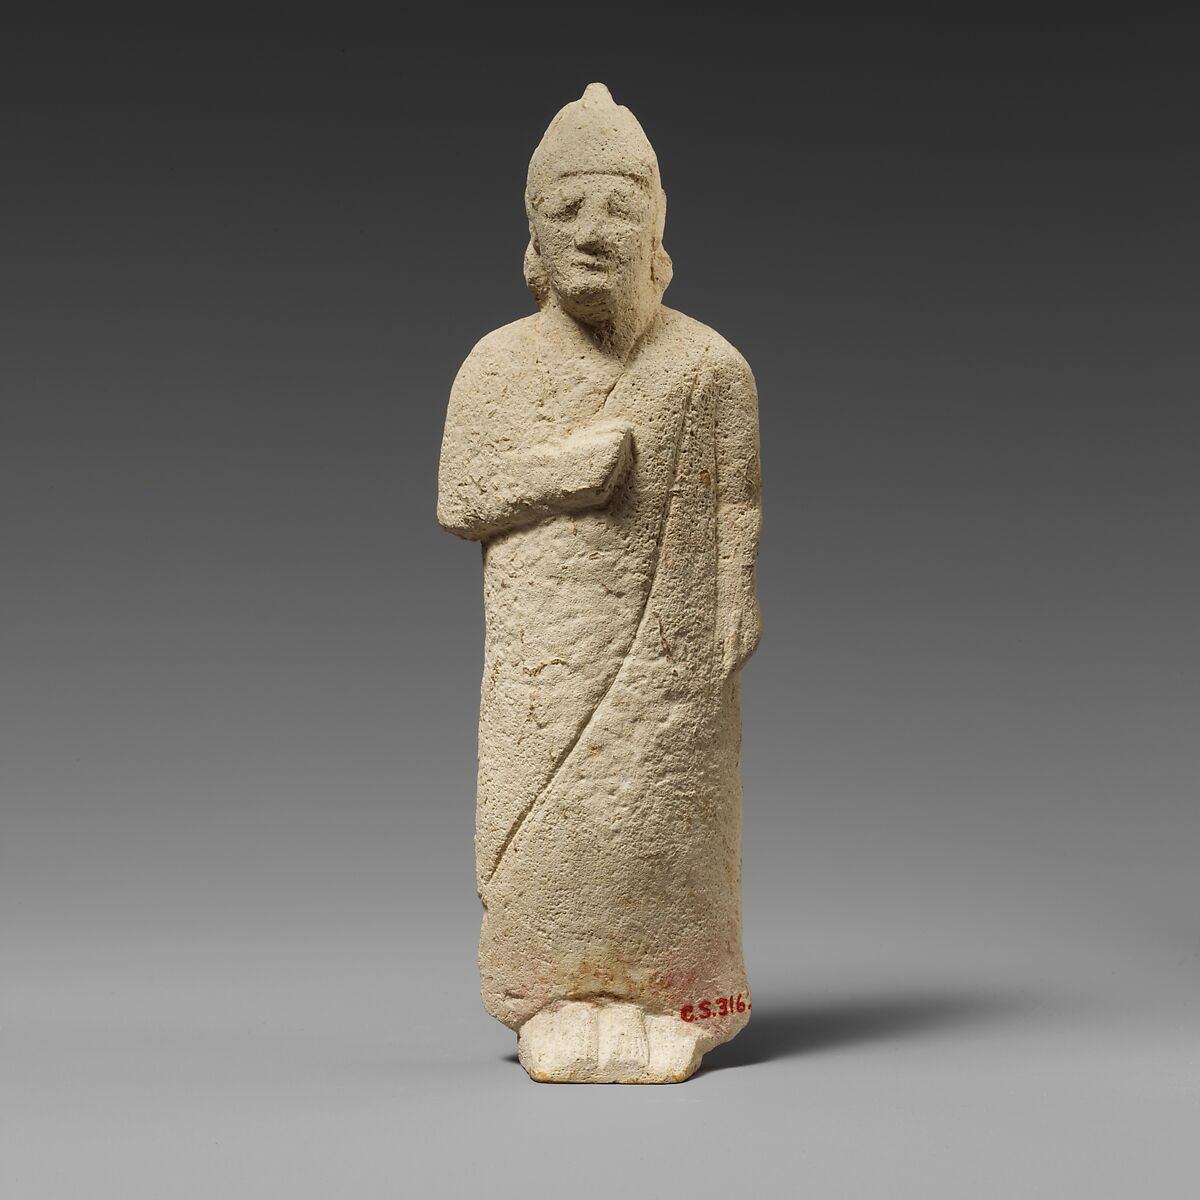 Limestone statuette of a beardless male votary with a conical helmet, Limestone, Cypriot